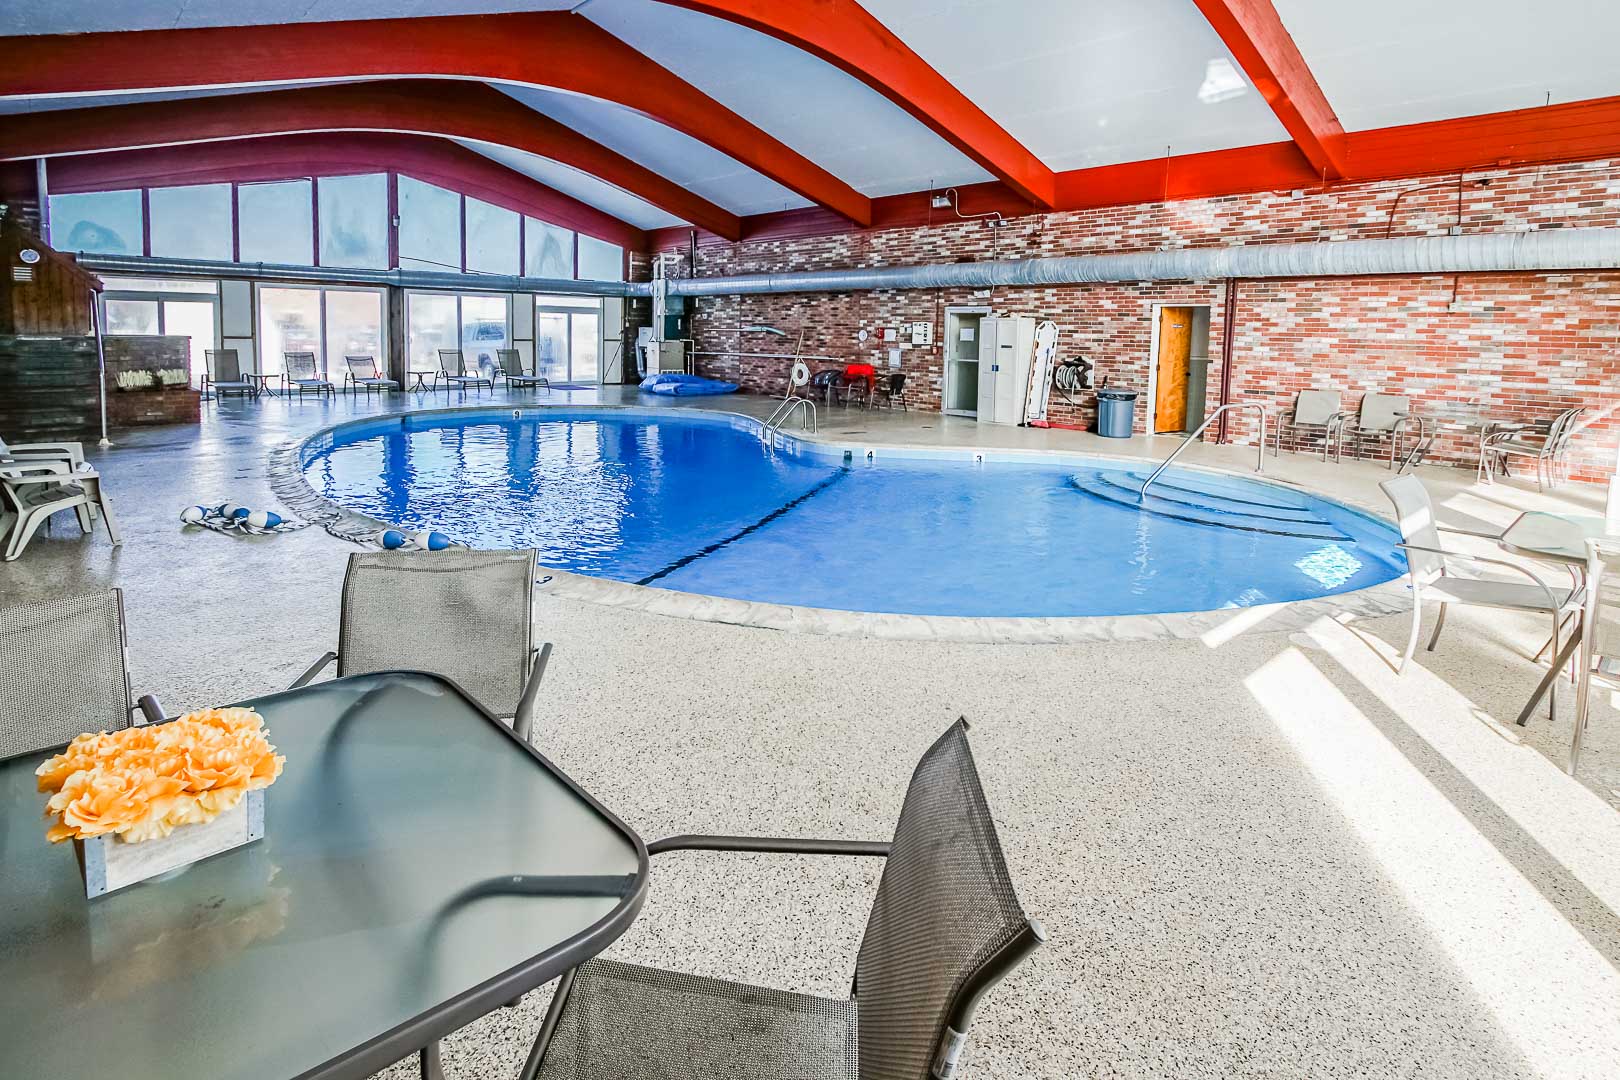 A tranquil indoor swimming pool at VRI's Courtyard Resort in Massachusetts.